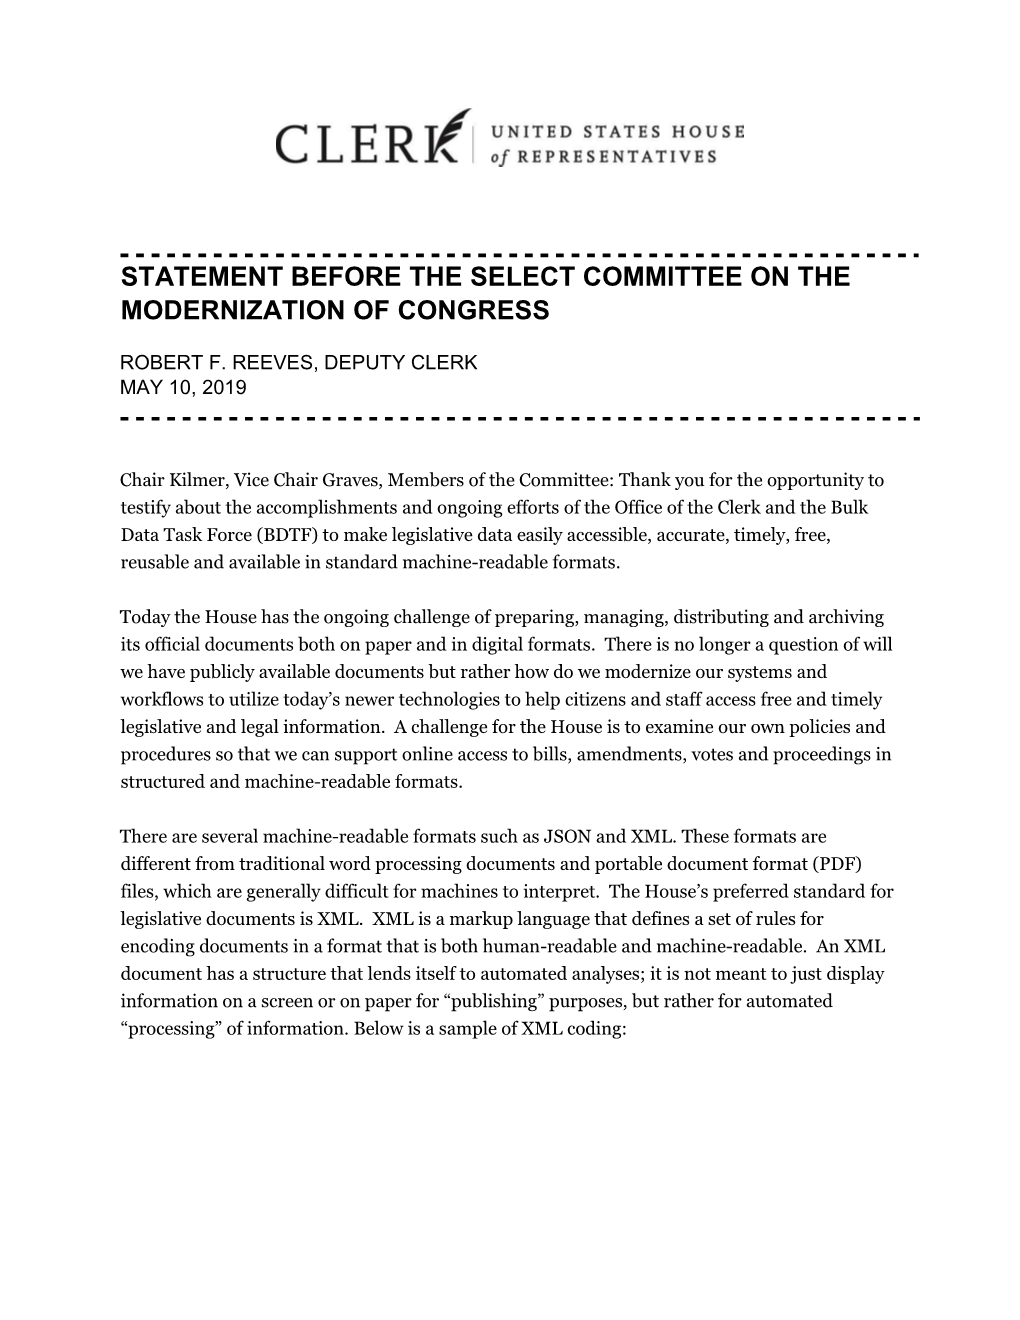 Statement Before the Select Committee on the Modernization of Congress